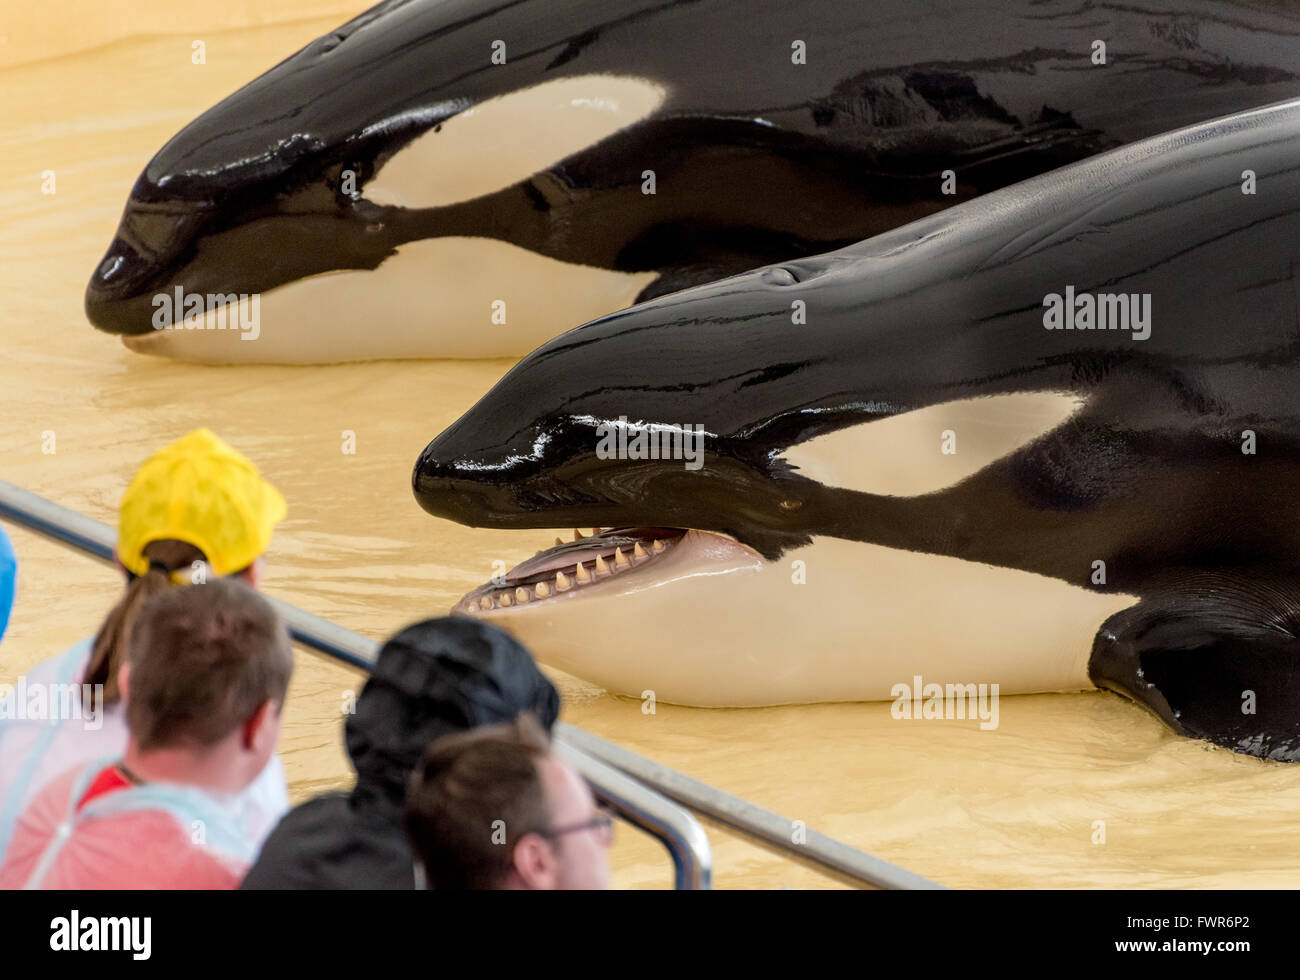 killer whales or orca (Orcinus orca) performing at Loro Parque, Tenerife Stock Photo